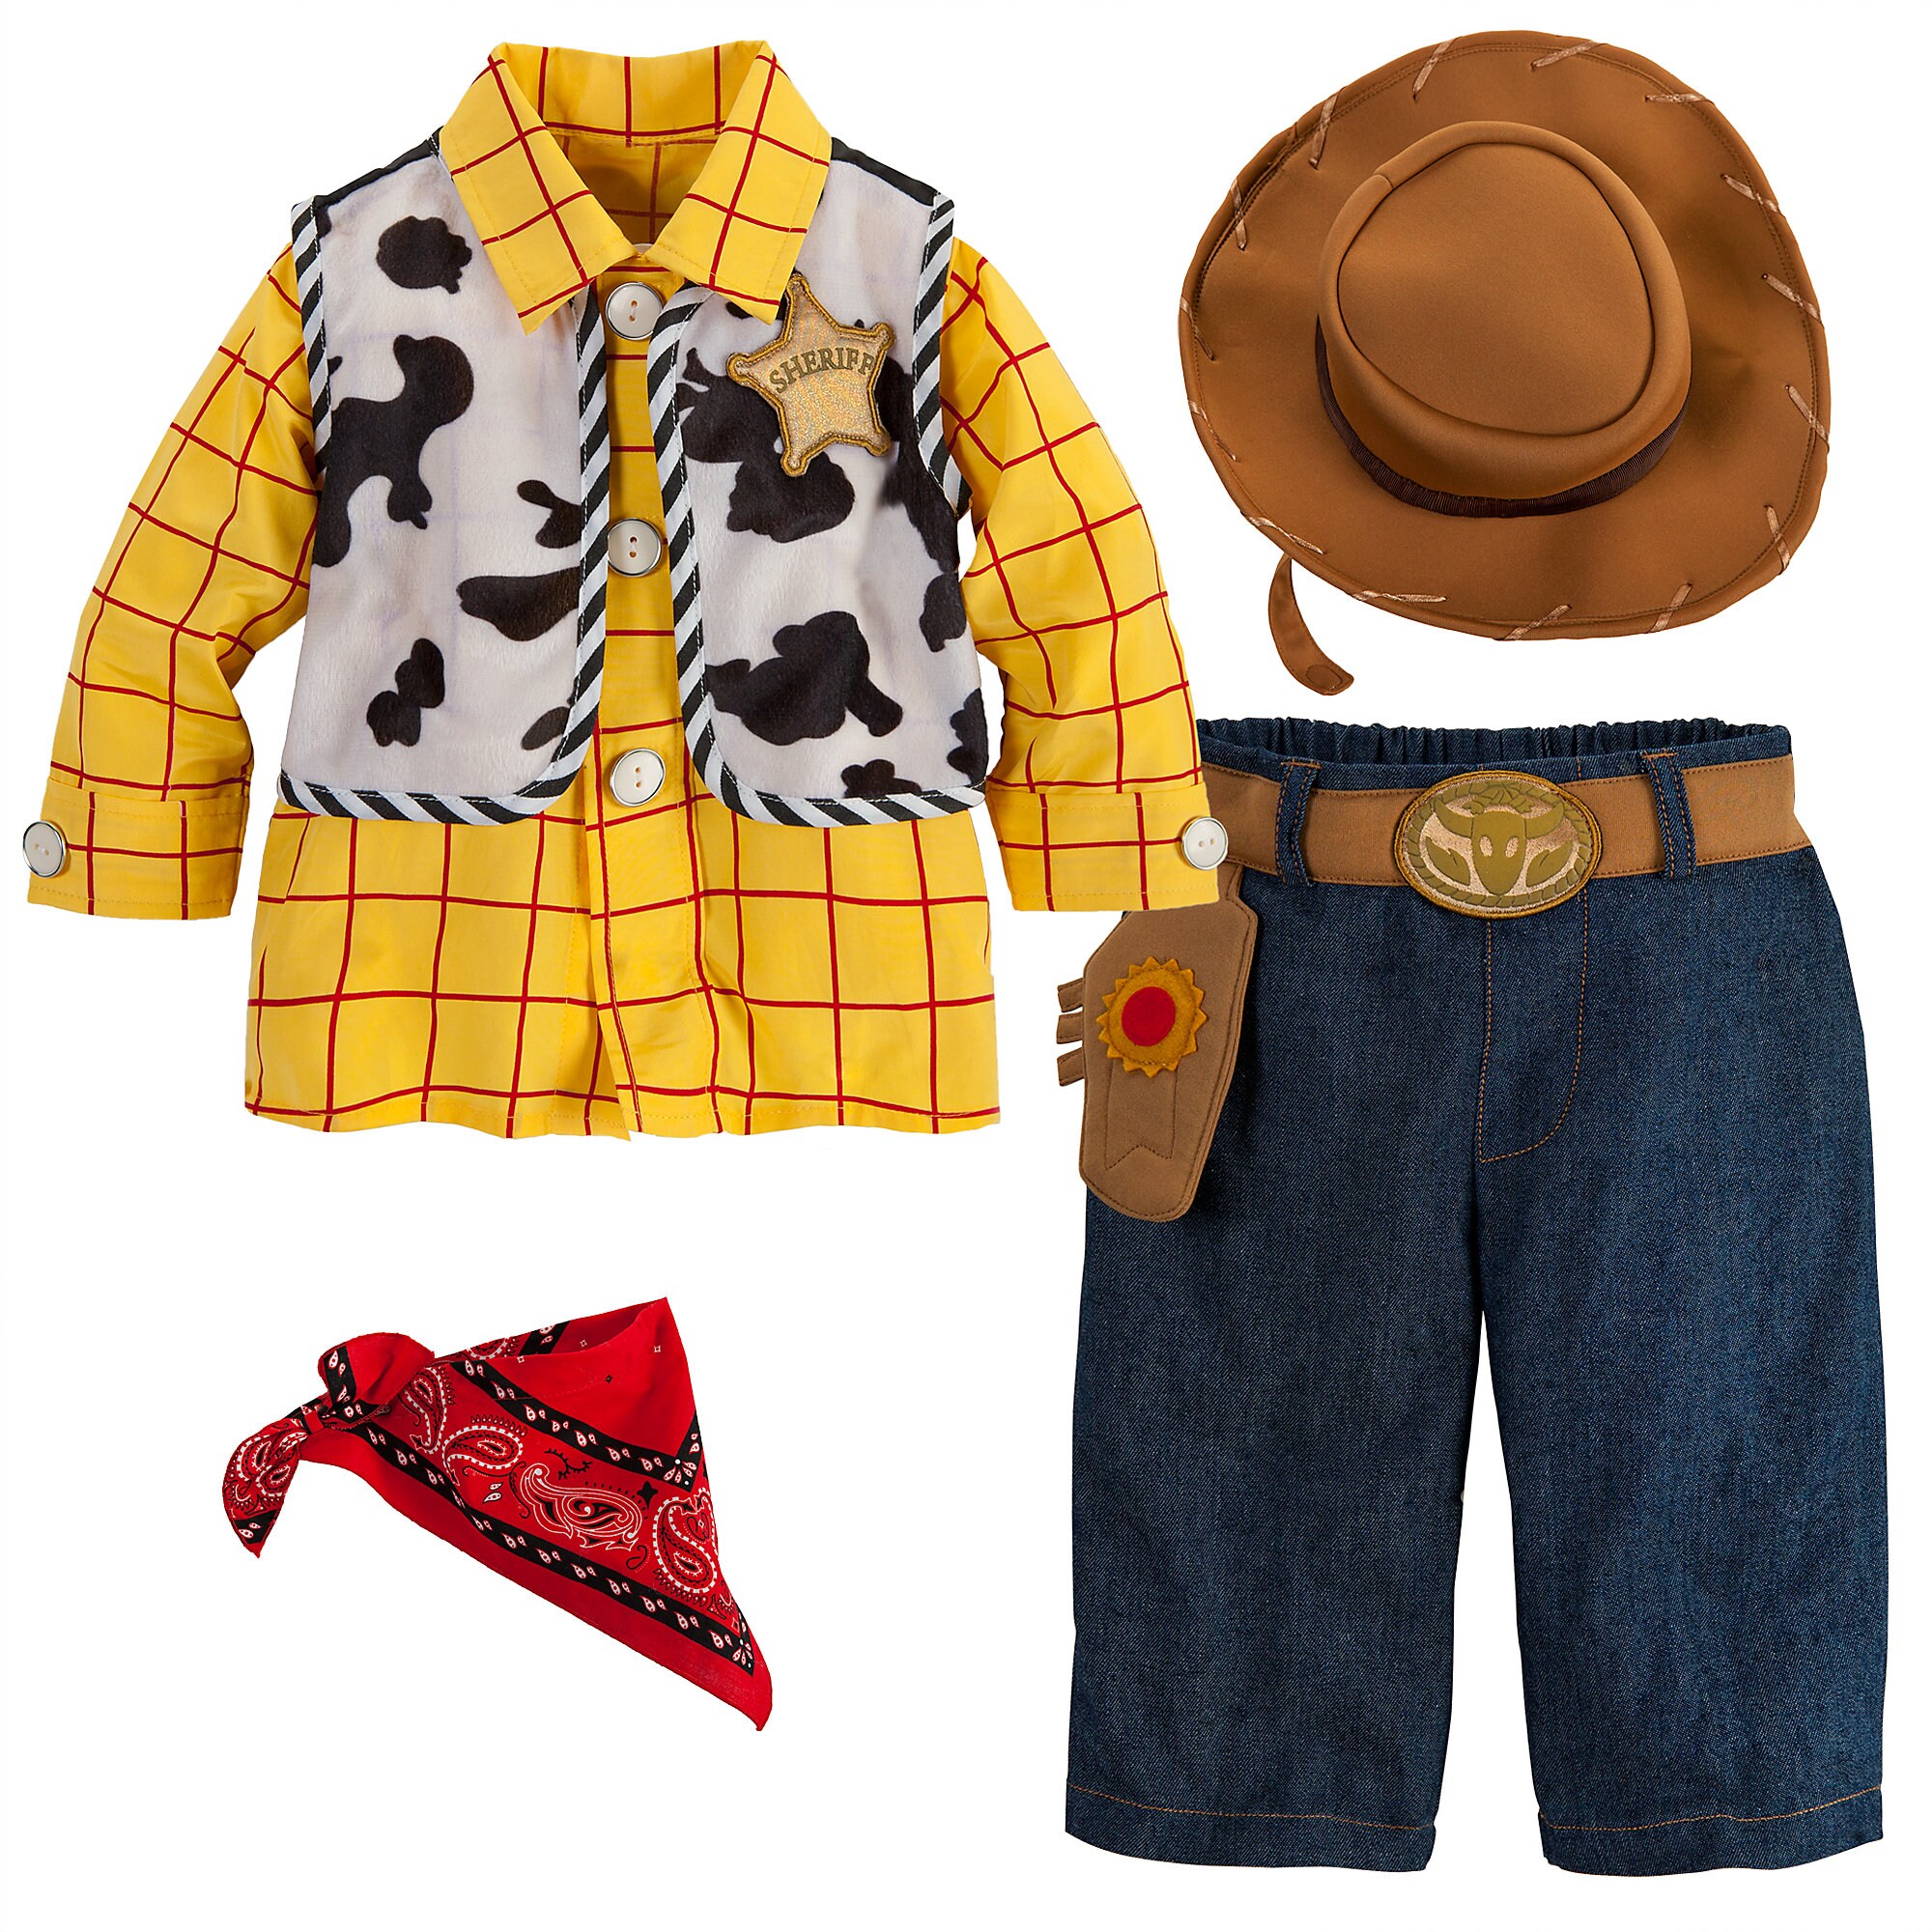 Woody Costume for Baby - Toy Story